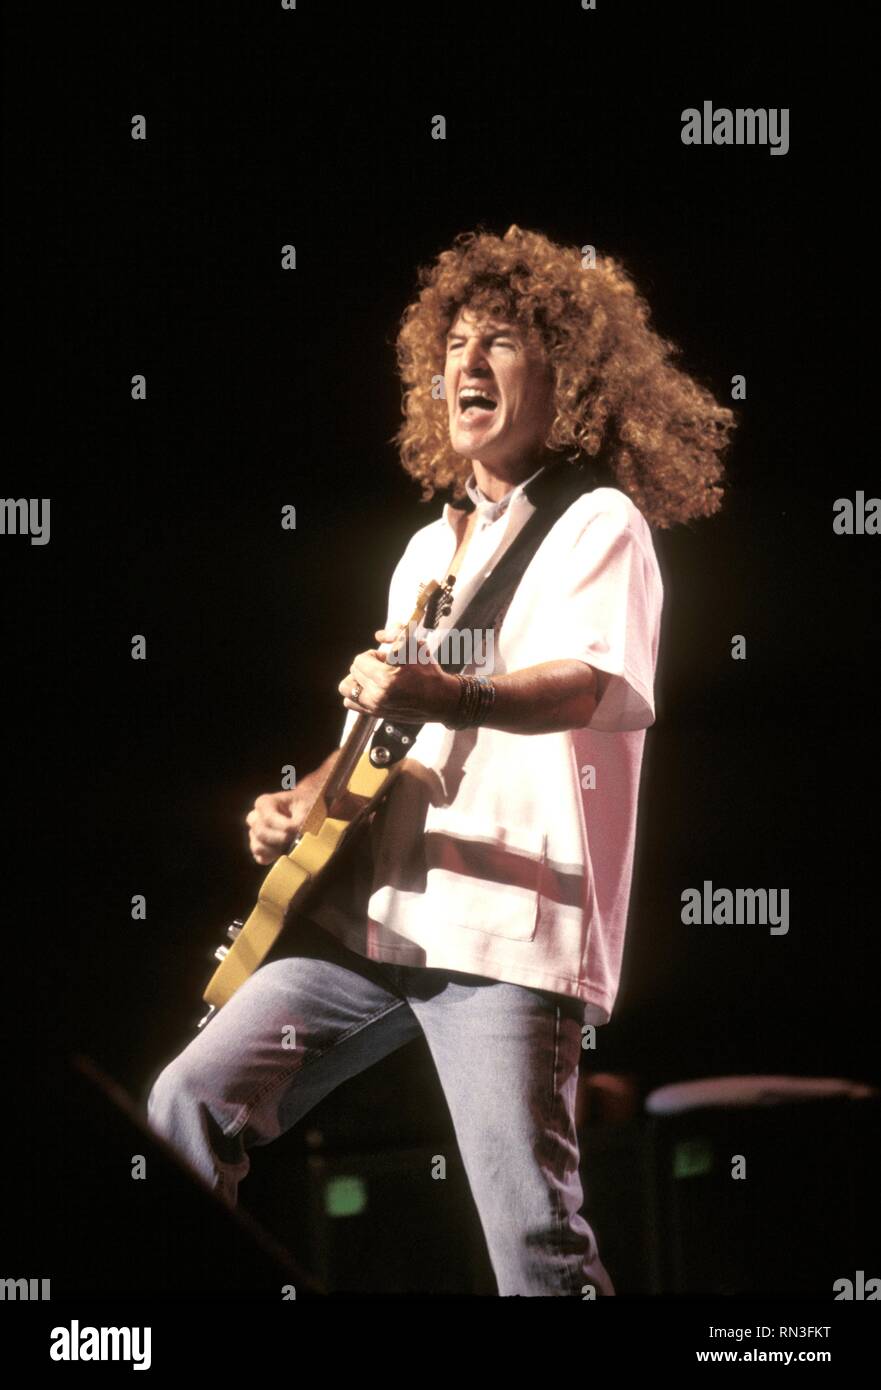 Singer and guitarist Kevin Cronin of the rock band REO Speedwagon is shown performing on stage during a 'live' concert appearance. Stock Photo